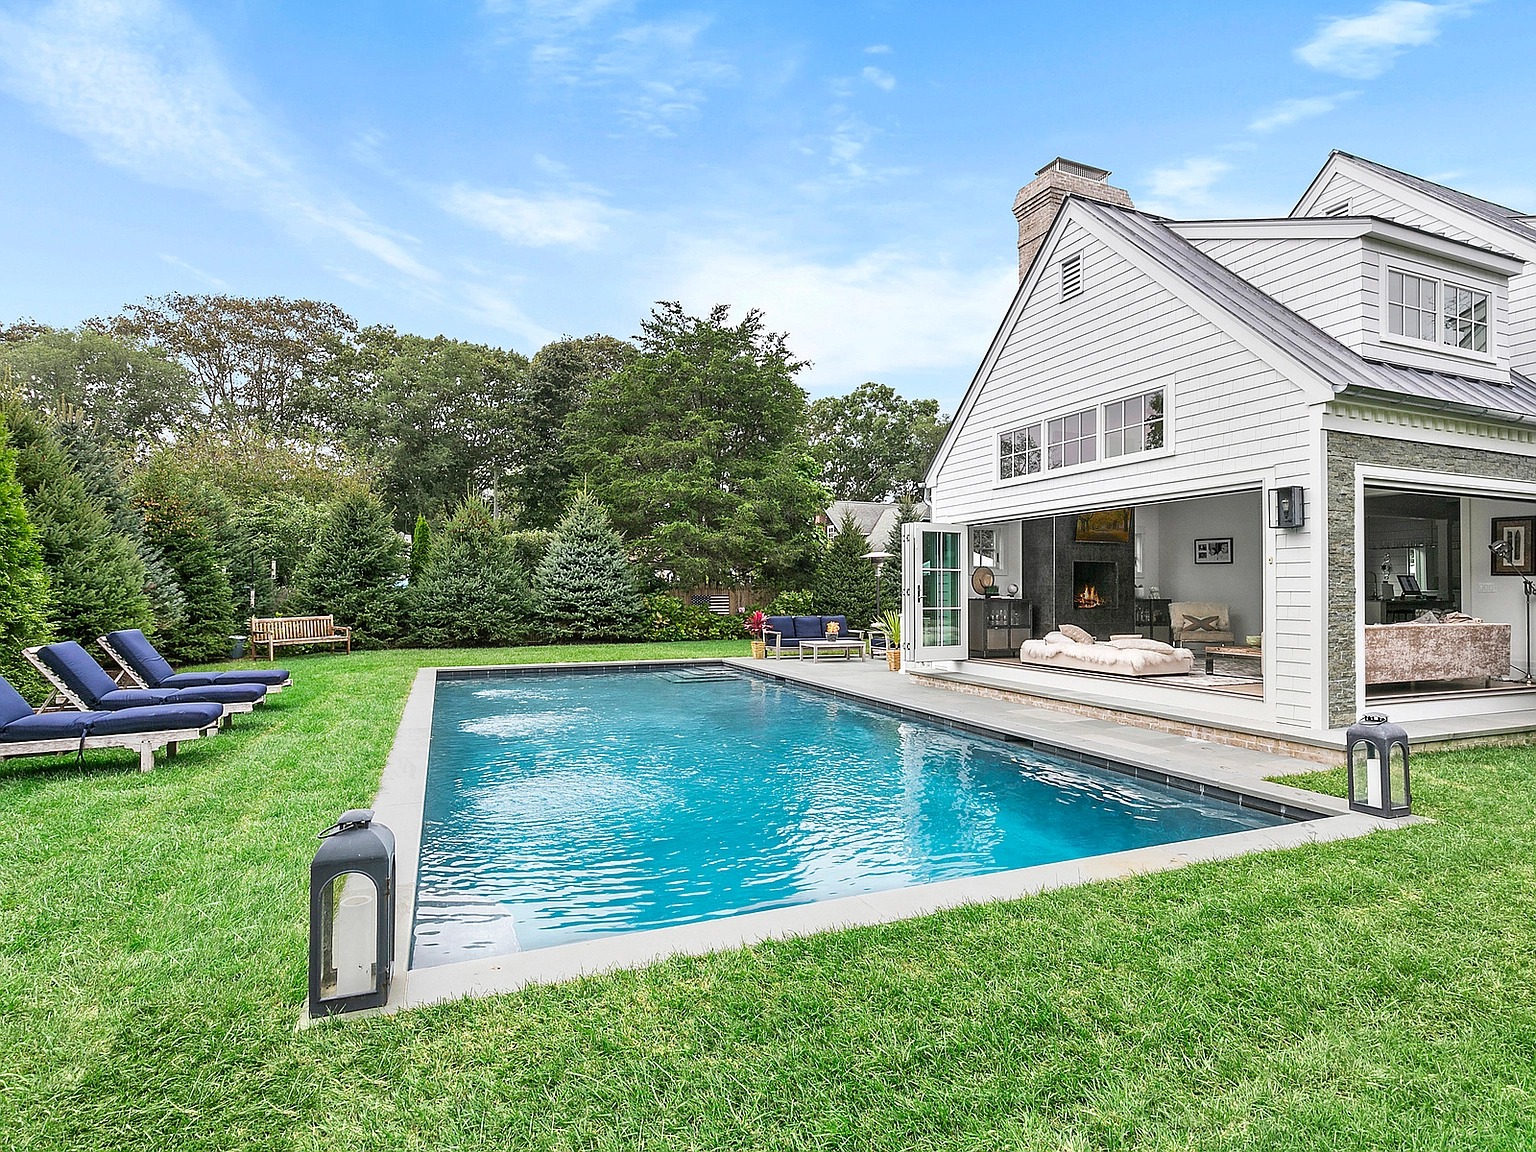 37 Church St, East Hampton, NY 11937 - $3,150,000 home for sale, house images, photos and pics gallery